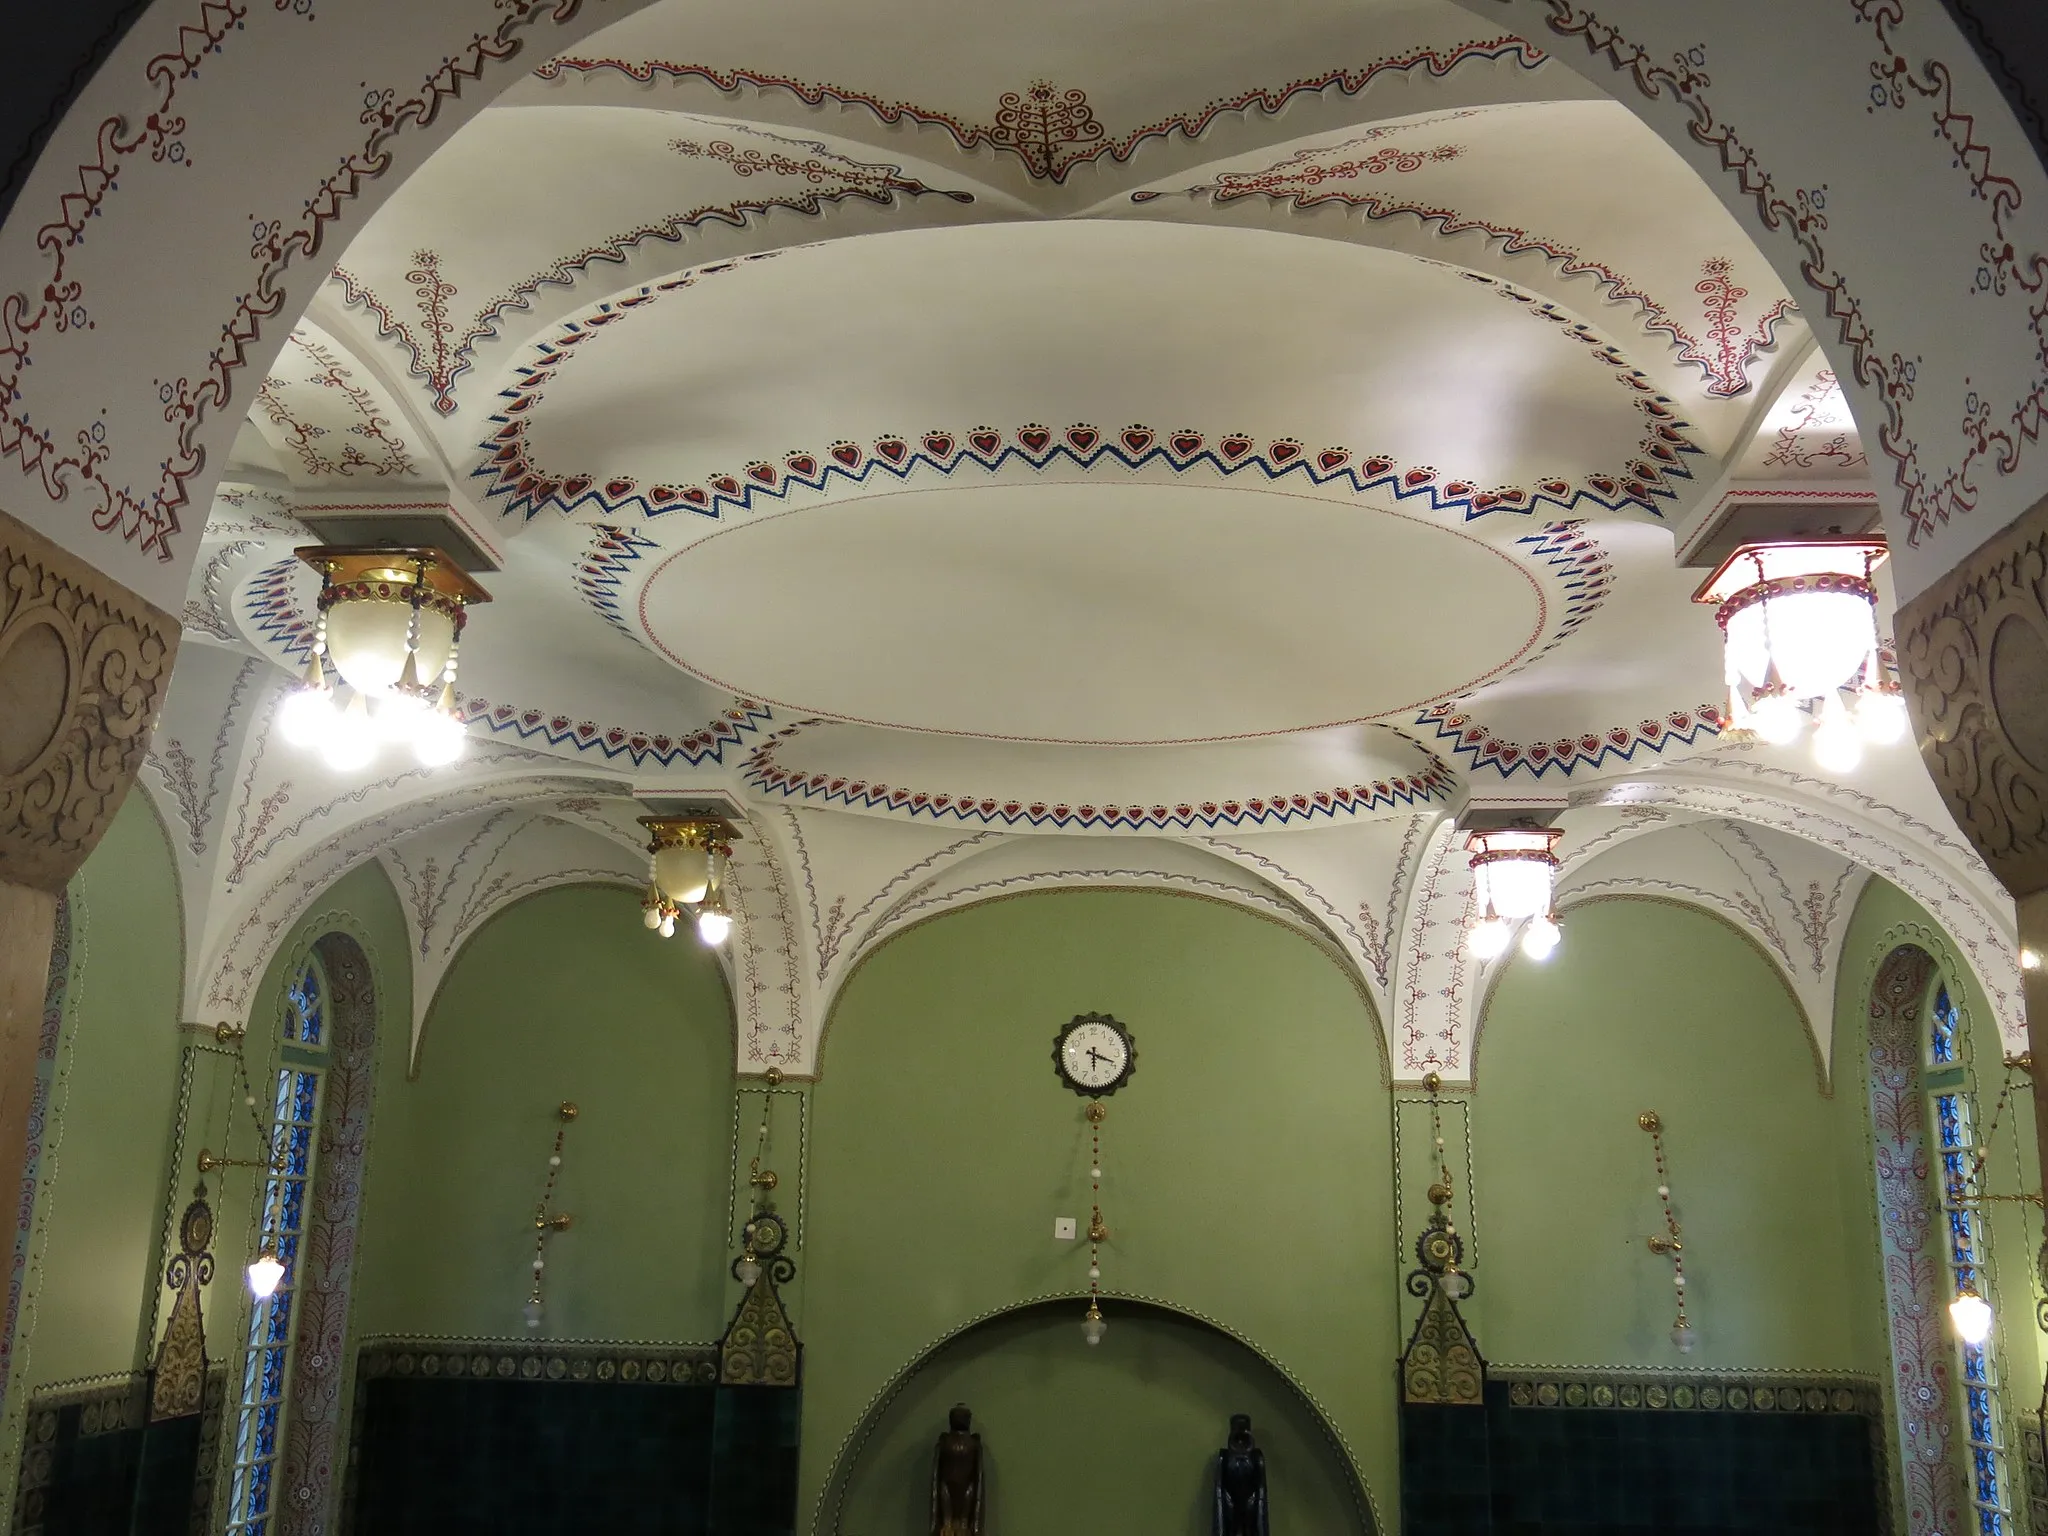 Photo showing: The ceiling of the Town Hall building in Subotica, Serbia